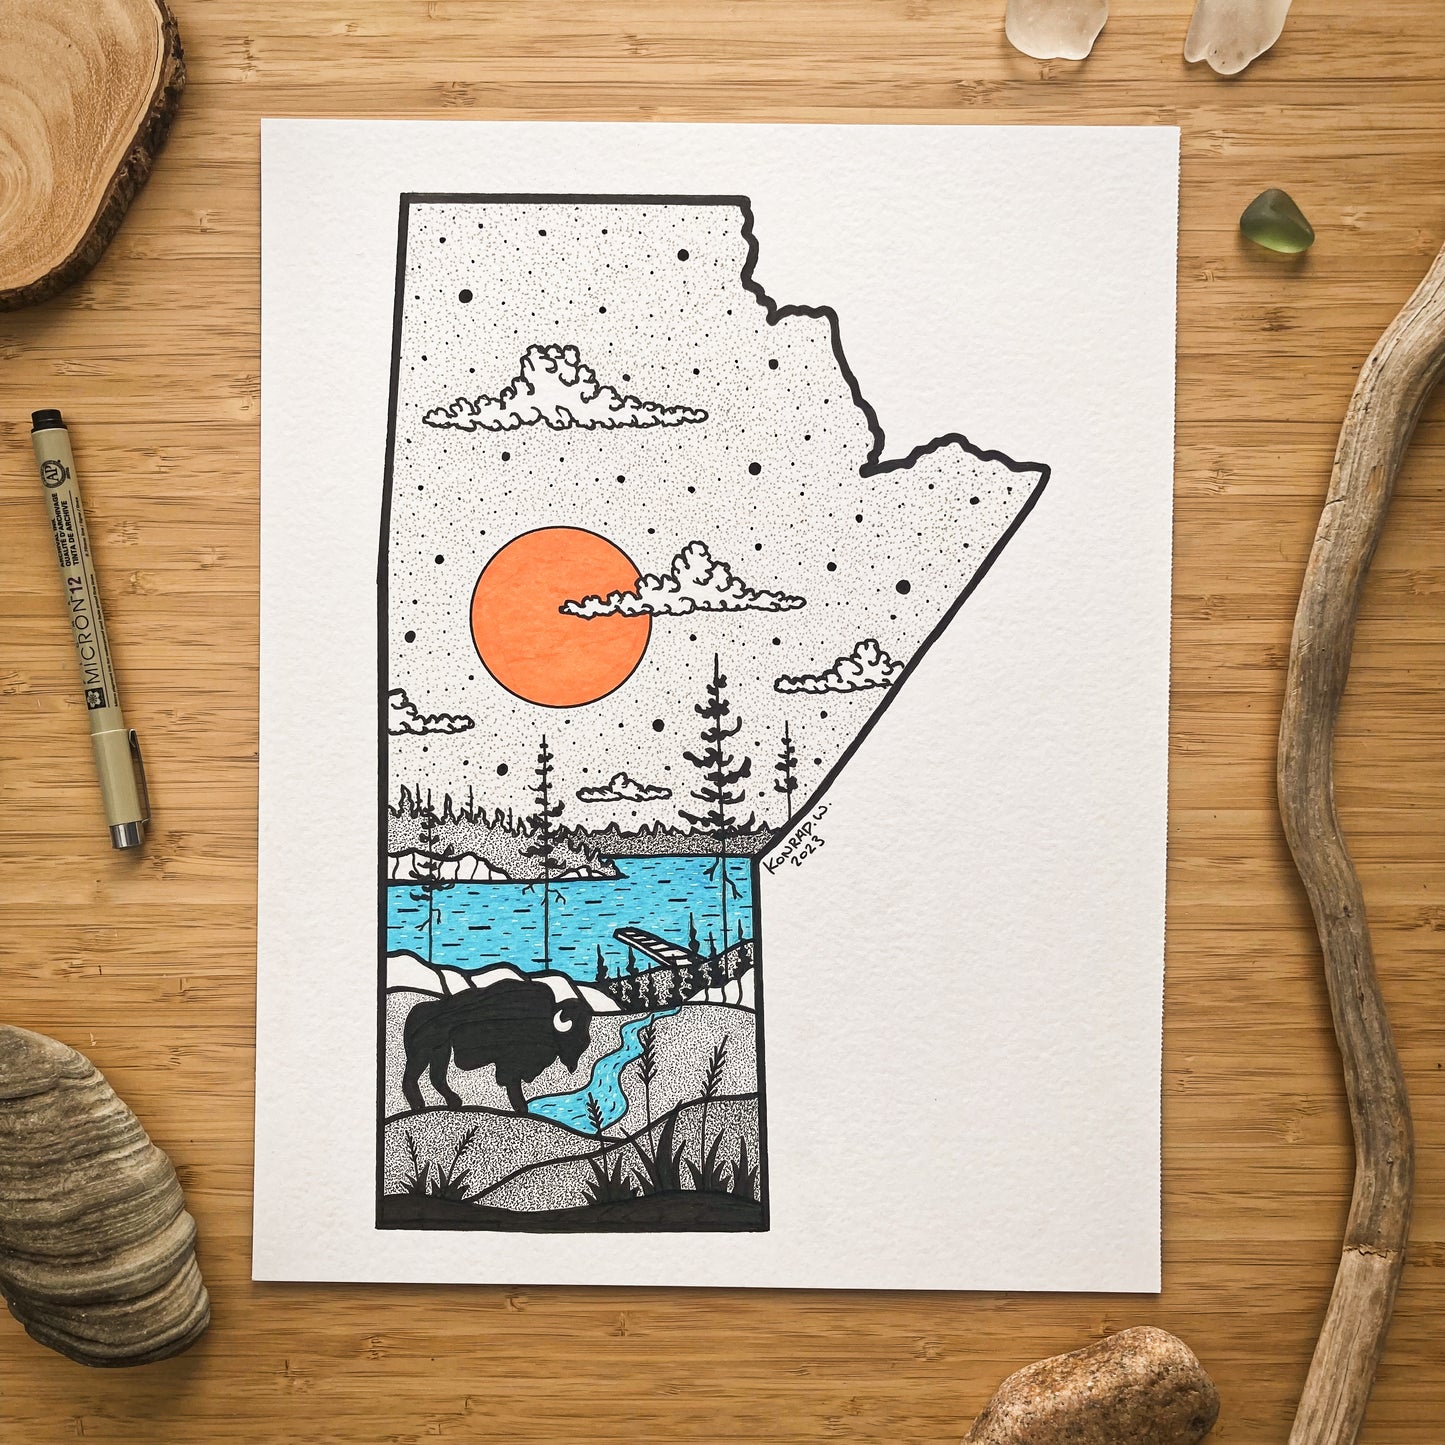 The Province of Manitoba - 11x14 ORIGINAL Pen and Ink Illustration